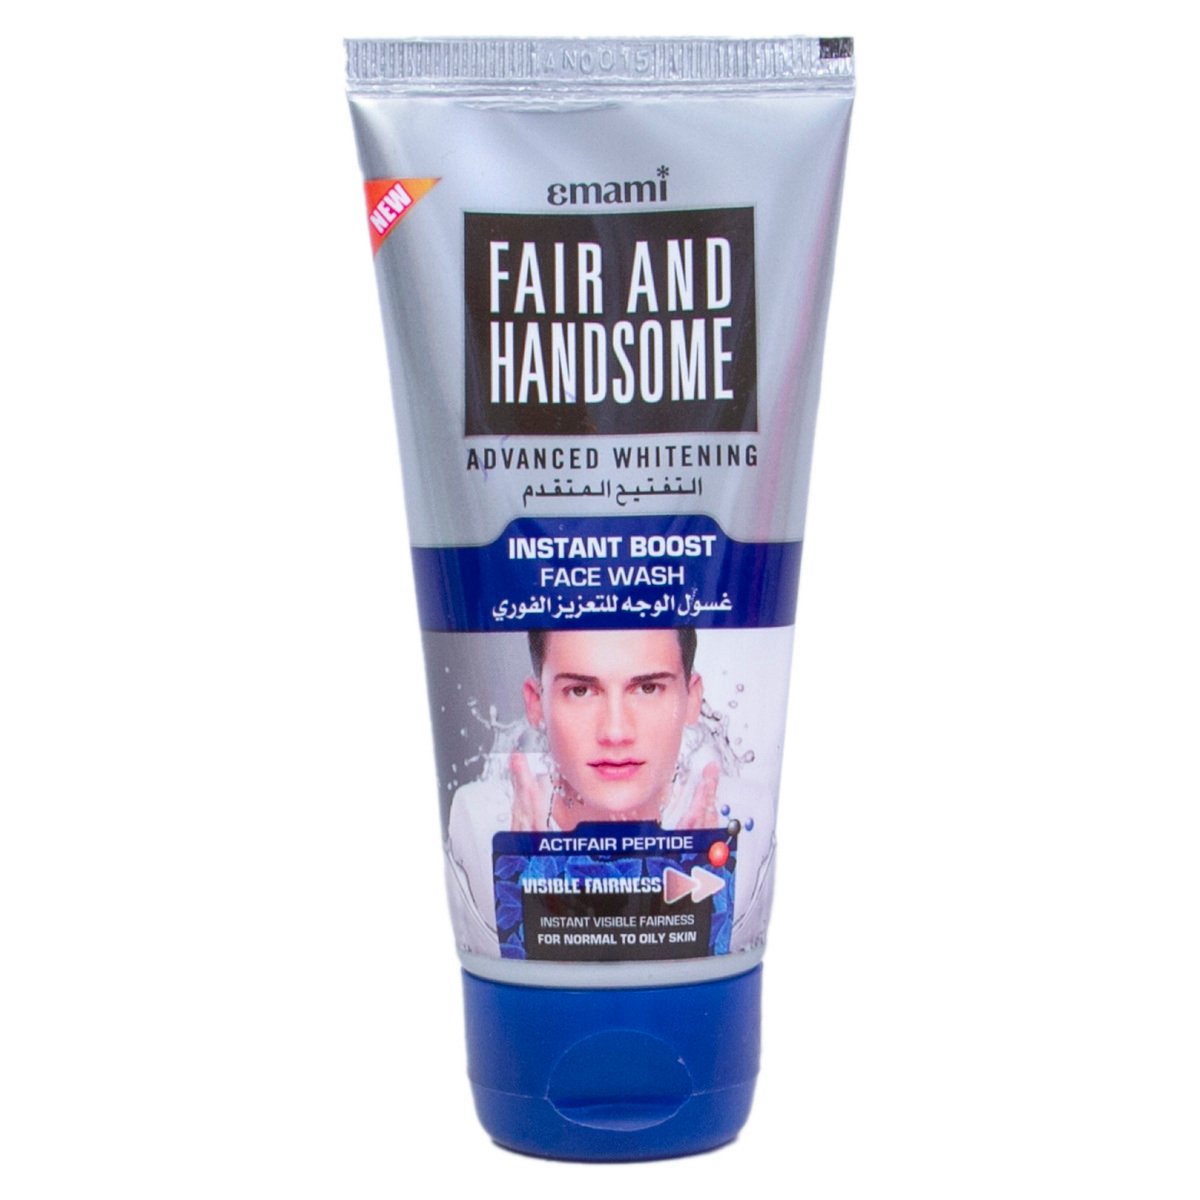 Emami Fair & Handsome Face Wash Advanced Whitening Instant Boost 50 ml